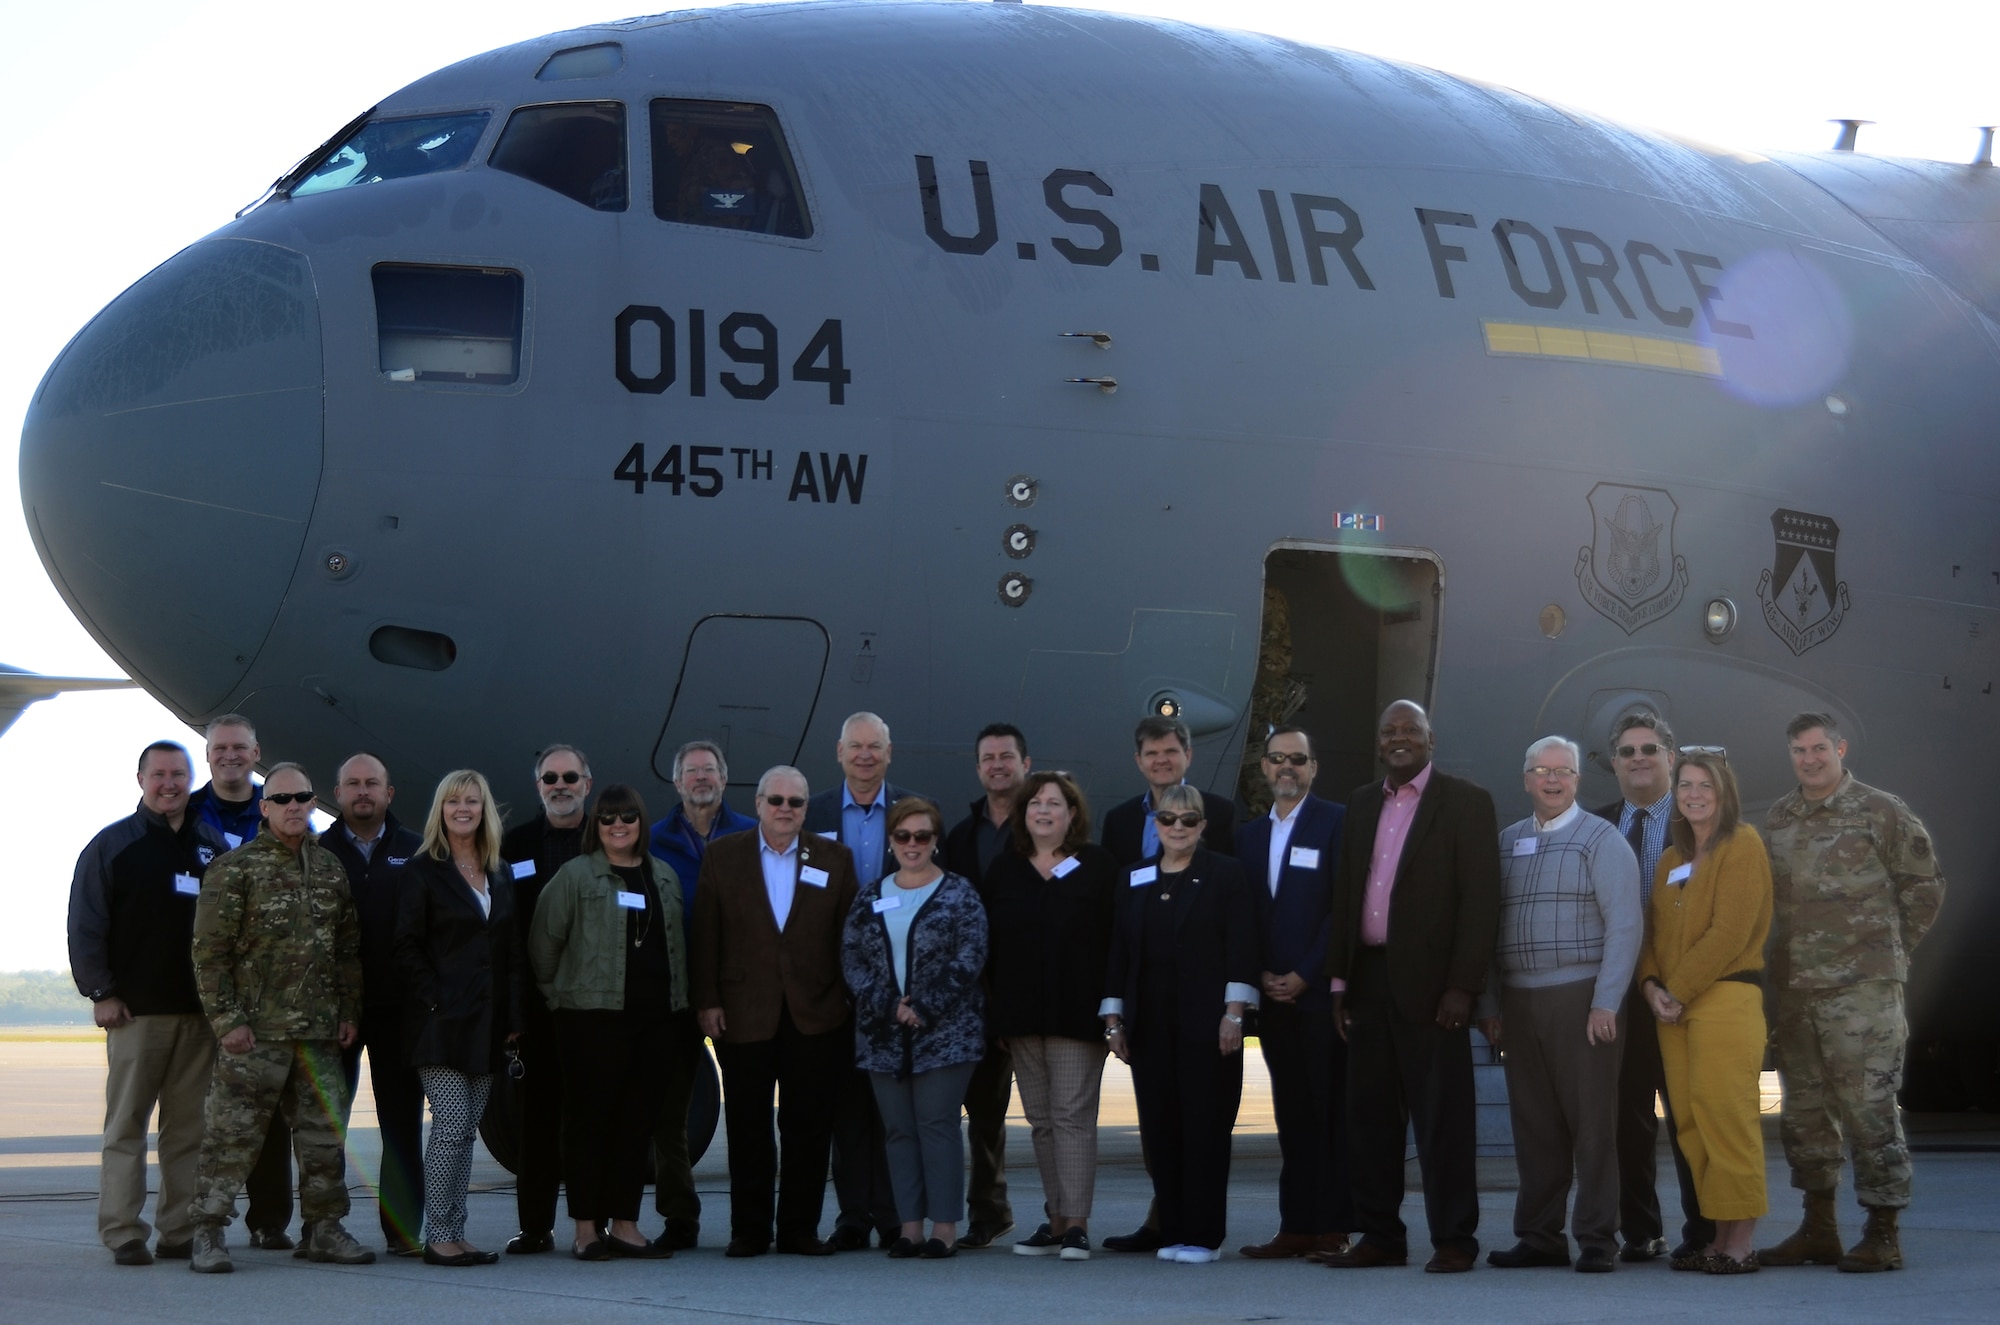 Nineteen Greater Dayton area civic leaders participated in a civic leader tour hosted by the 445th Airlift Wing Oct. 9-10 at both Peterson Air Force Base and the Air Force Academy in Colorado Springs, Colorado. The group left Wright-Patterson Air Force Base onboard one of the wing’s C-17 Globemaster IIIs to Peterson Air Force Base, Colorado.